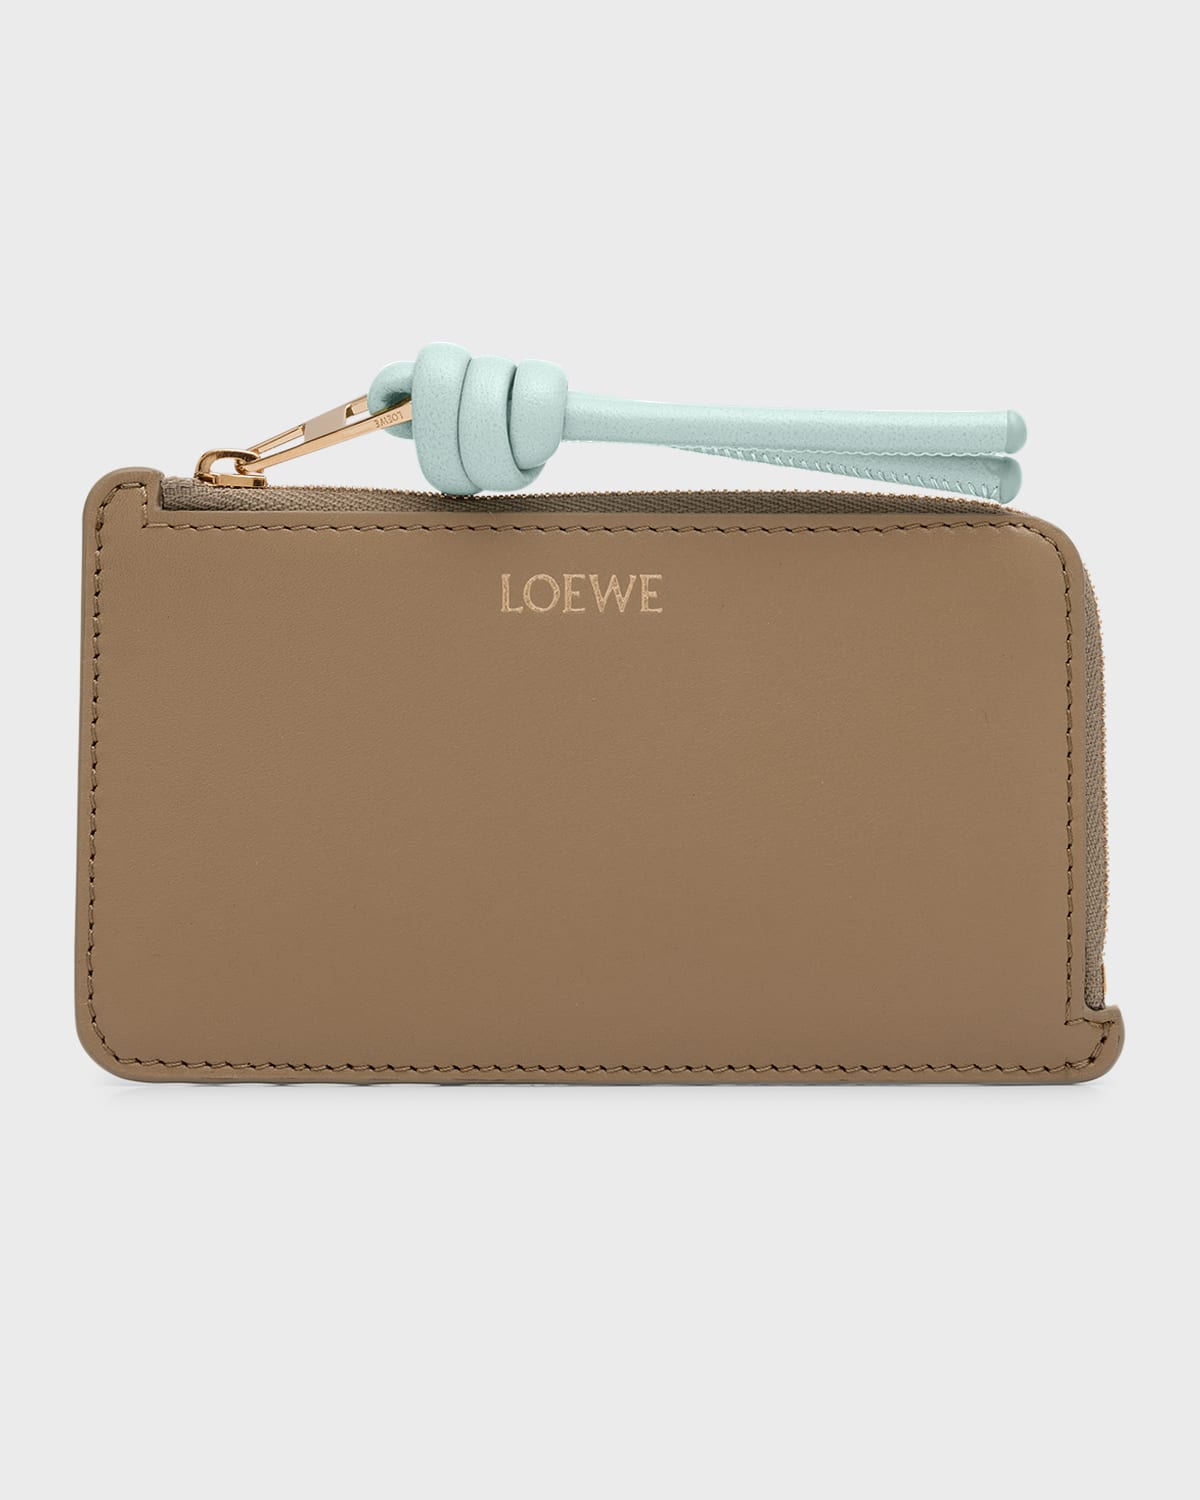 Loewe Knot Zip Leather Card Holder In 8448 Sand Blue Ic